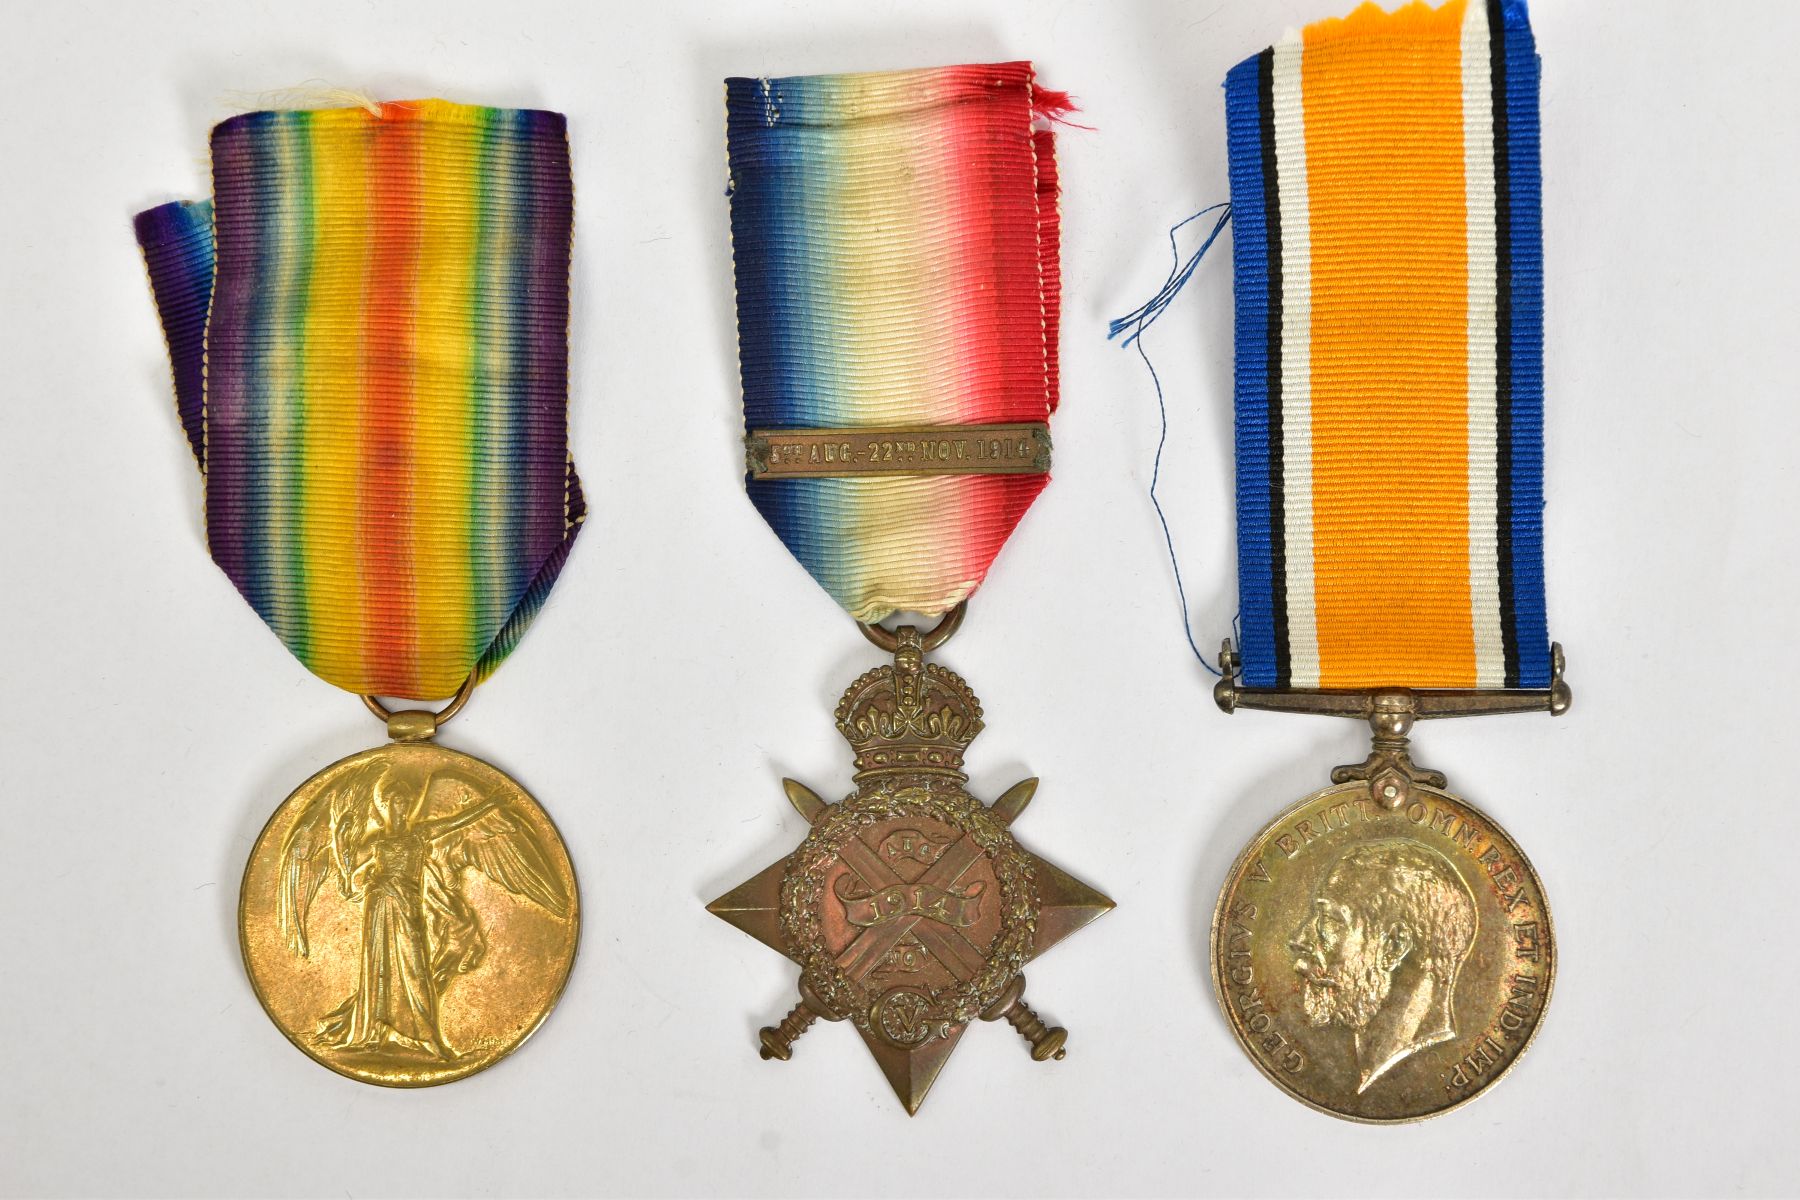 A WWI 1914 STAR AND AUG-NOV BAR, together with British War Medal named to 9260 Pte W Shaw. RAMC *A/